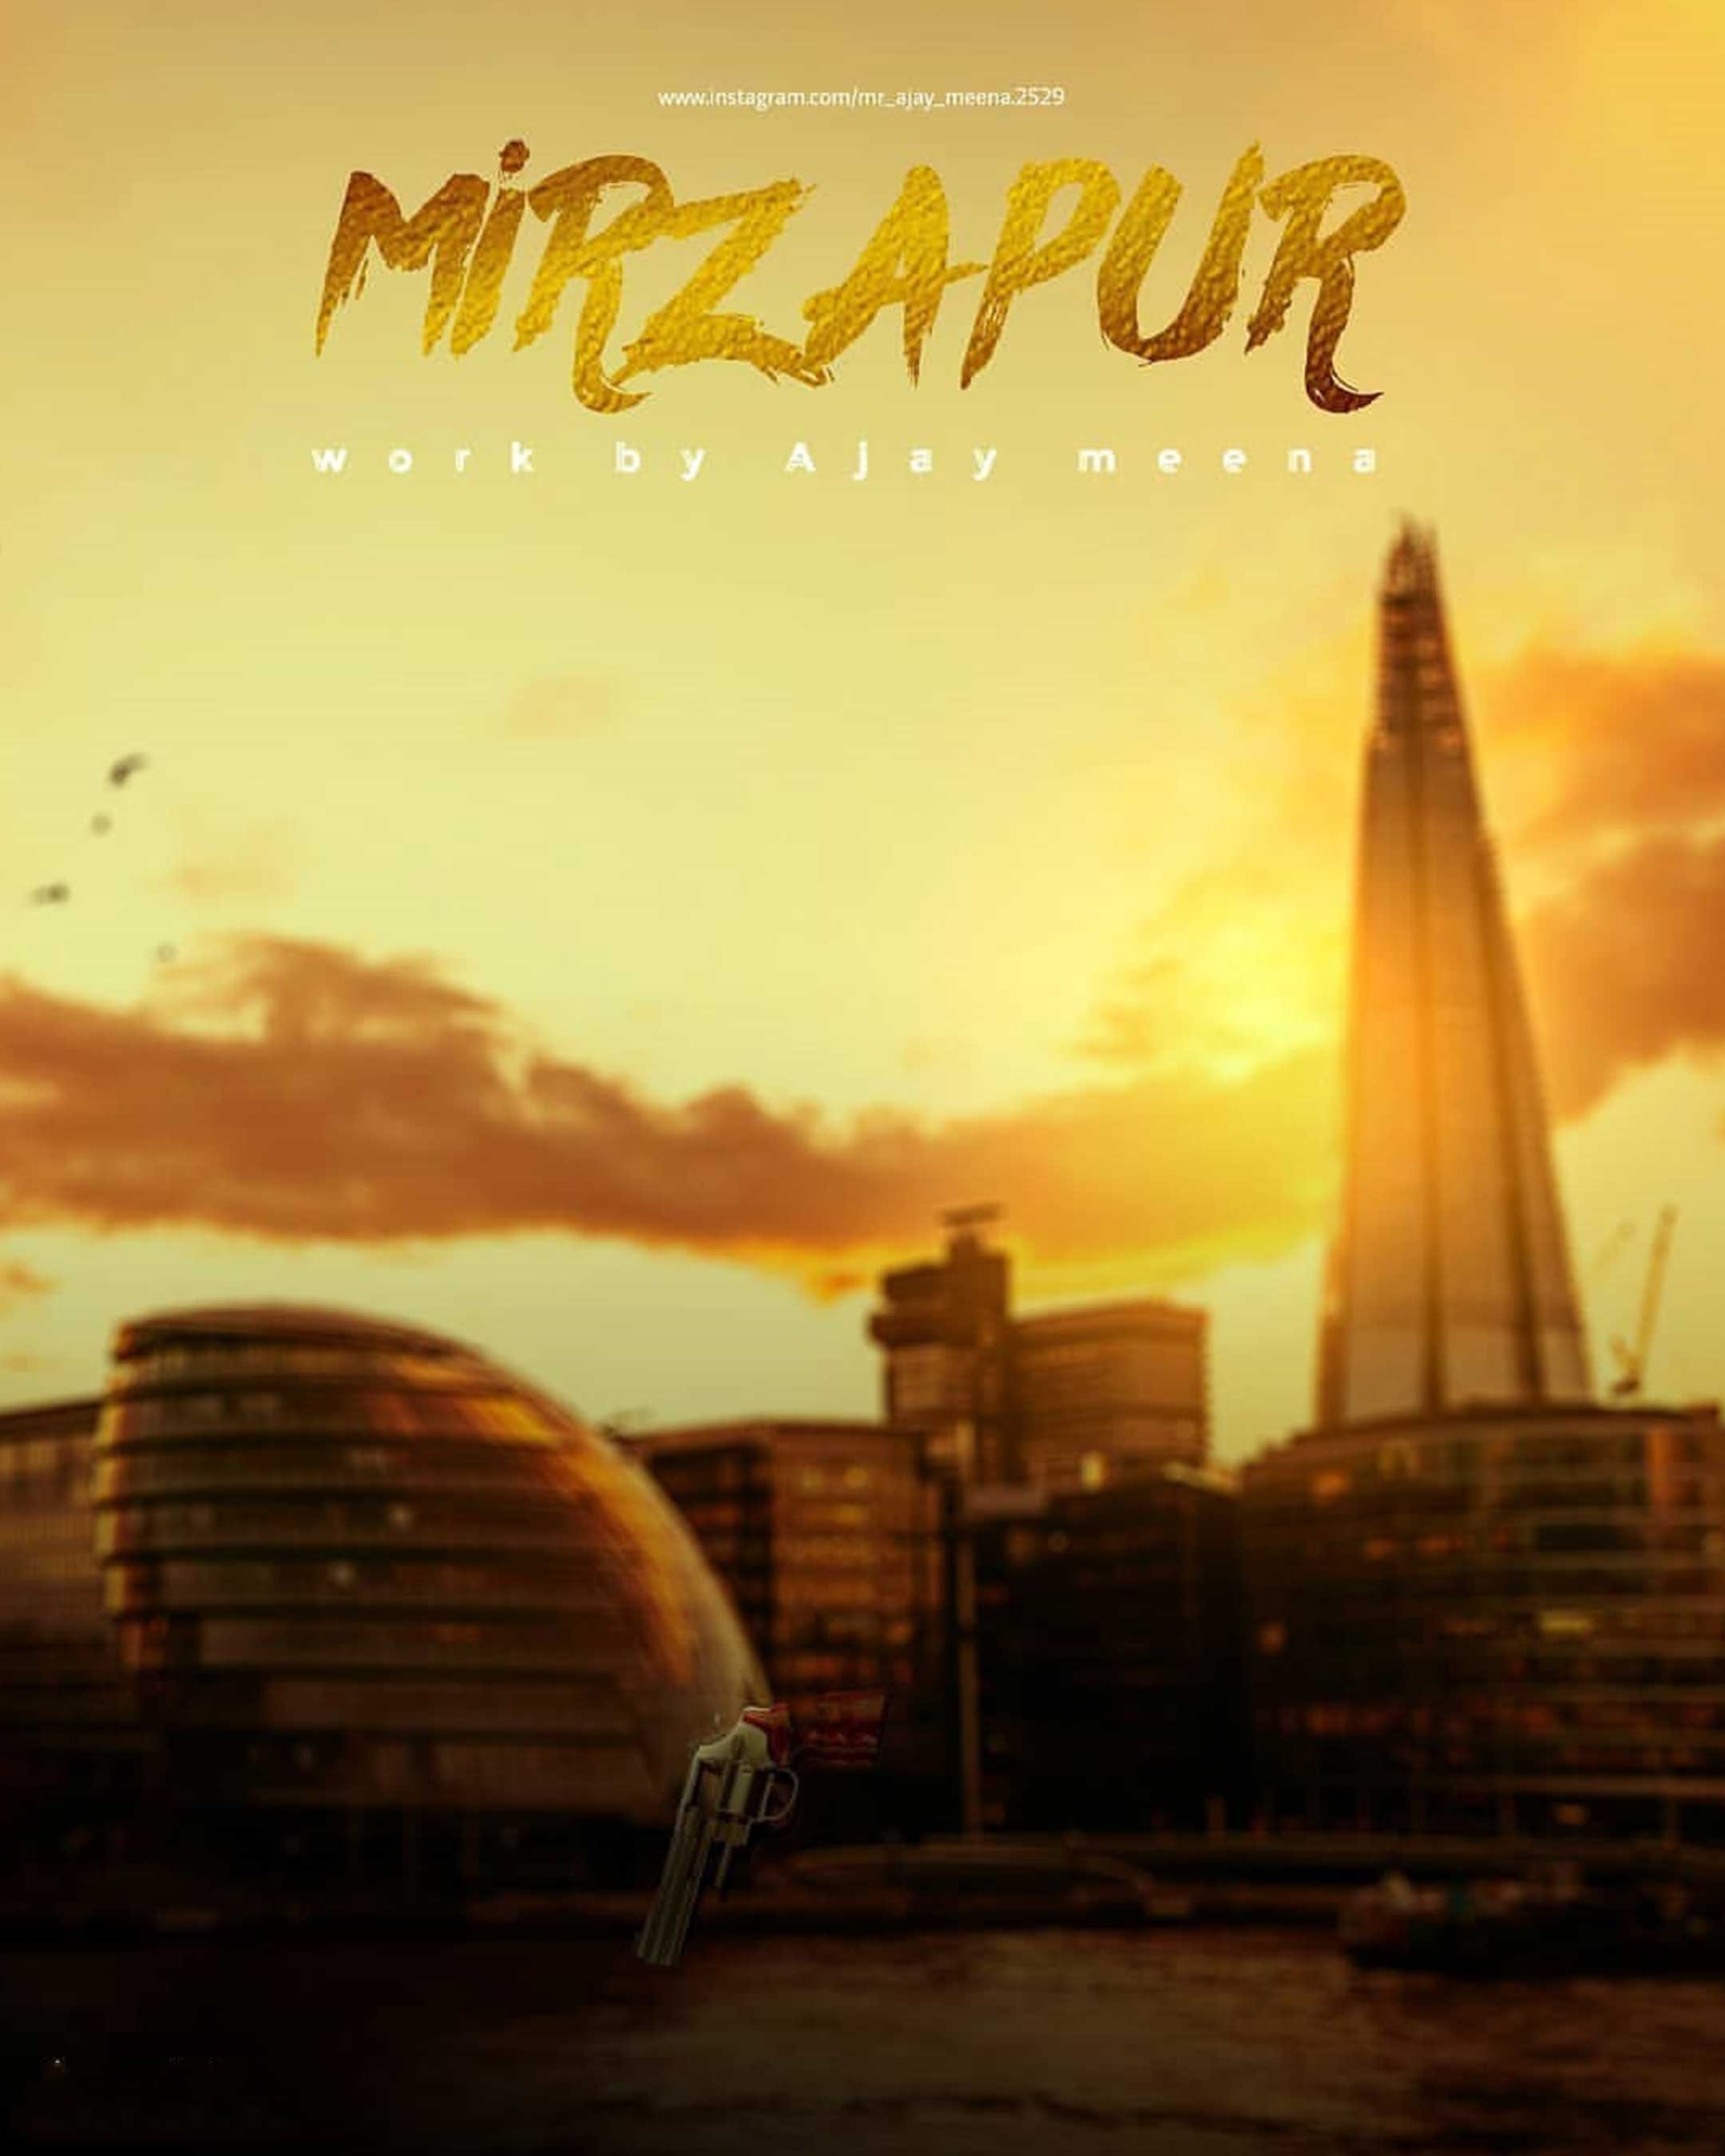 Mirzapur Action Movie Poster Background lightroom Image